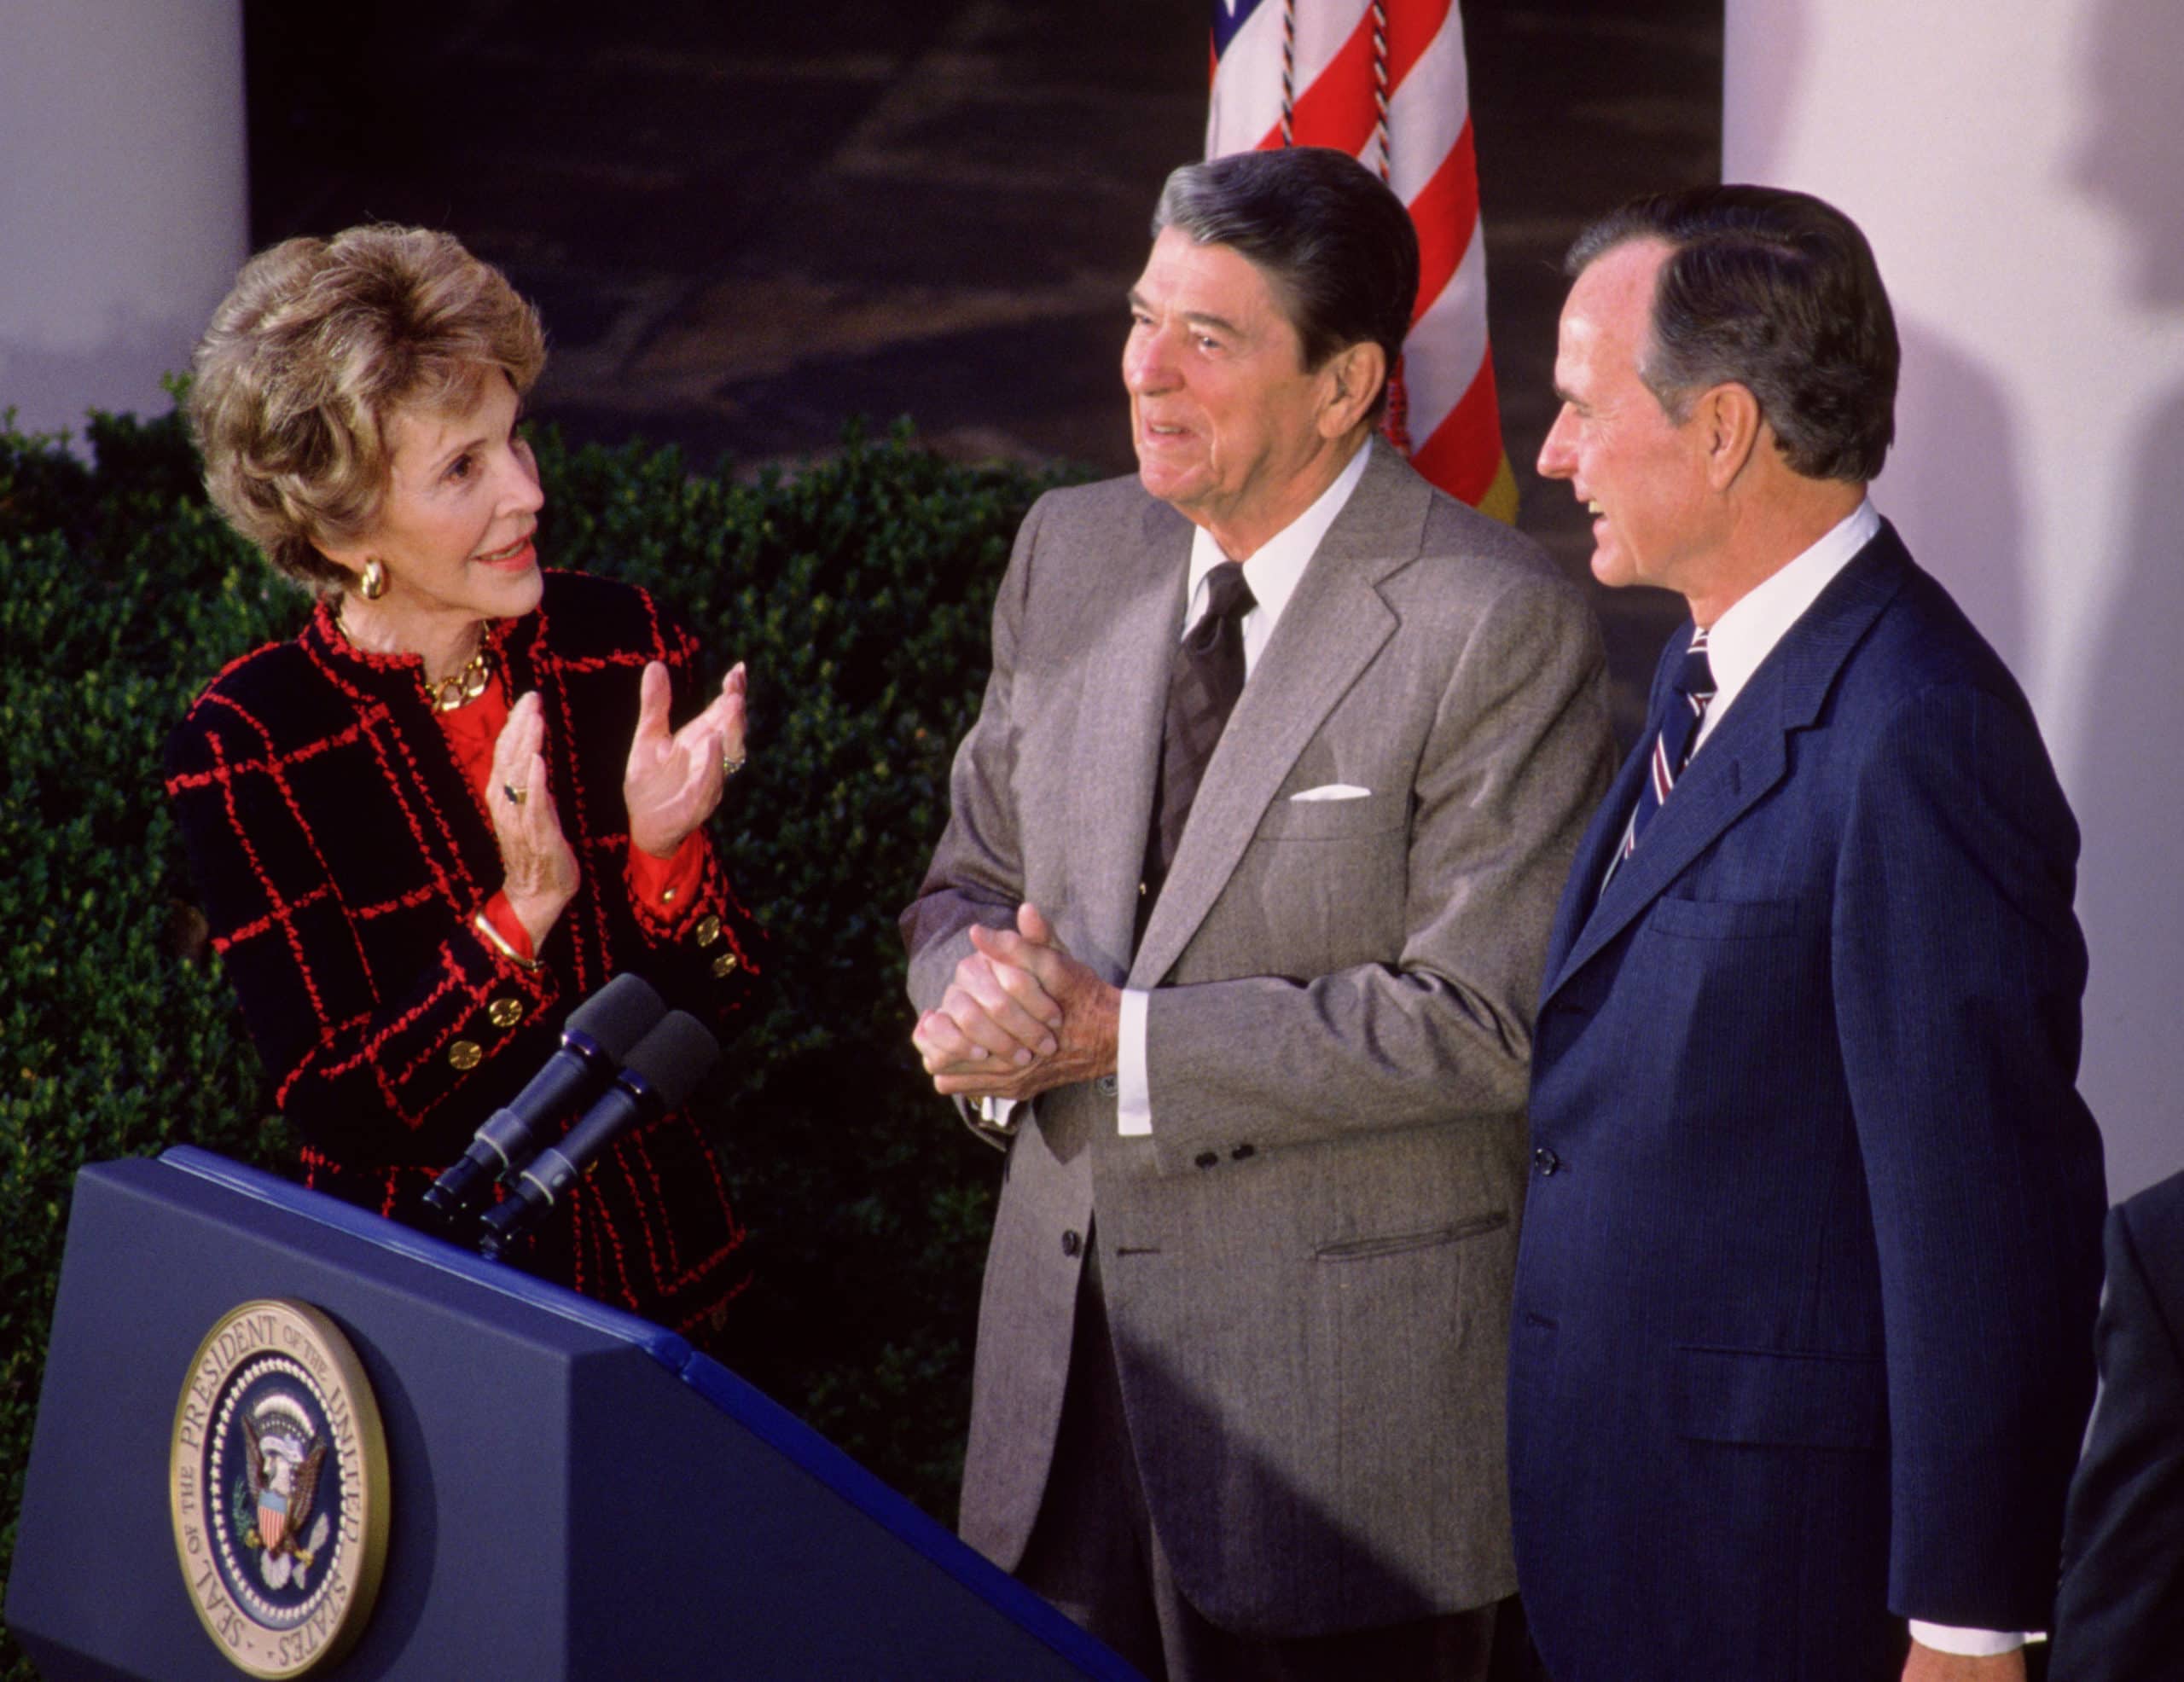 First Lady Nancy Reagan and President Ronald Reagan congratulate President-elect George Bush in the Rose Garden at the White House after Bush won the 1988 presidential election, November, 9, 1988, Washington, D.C.